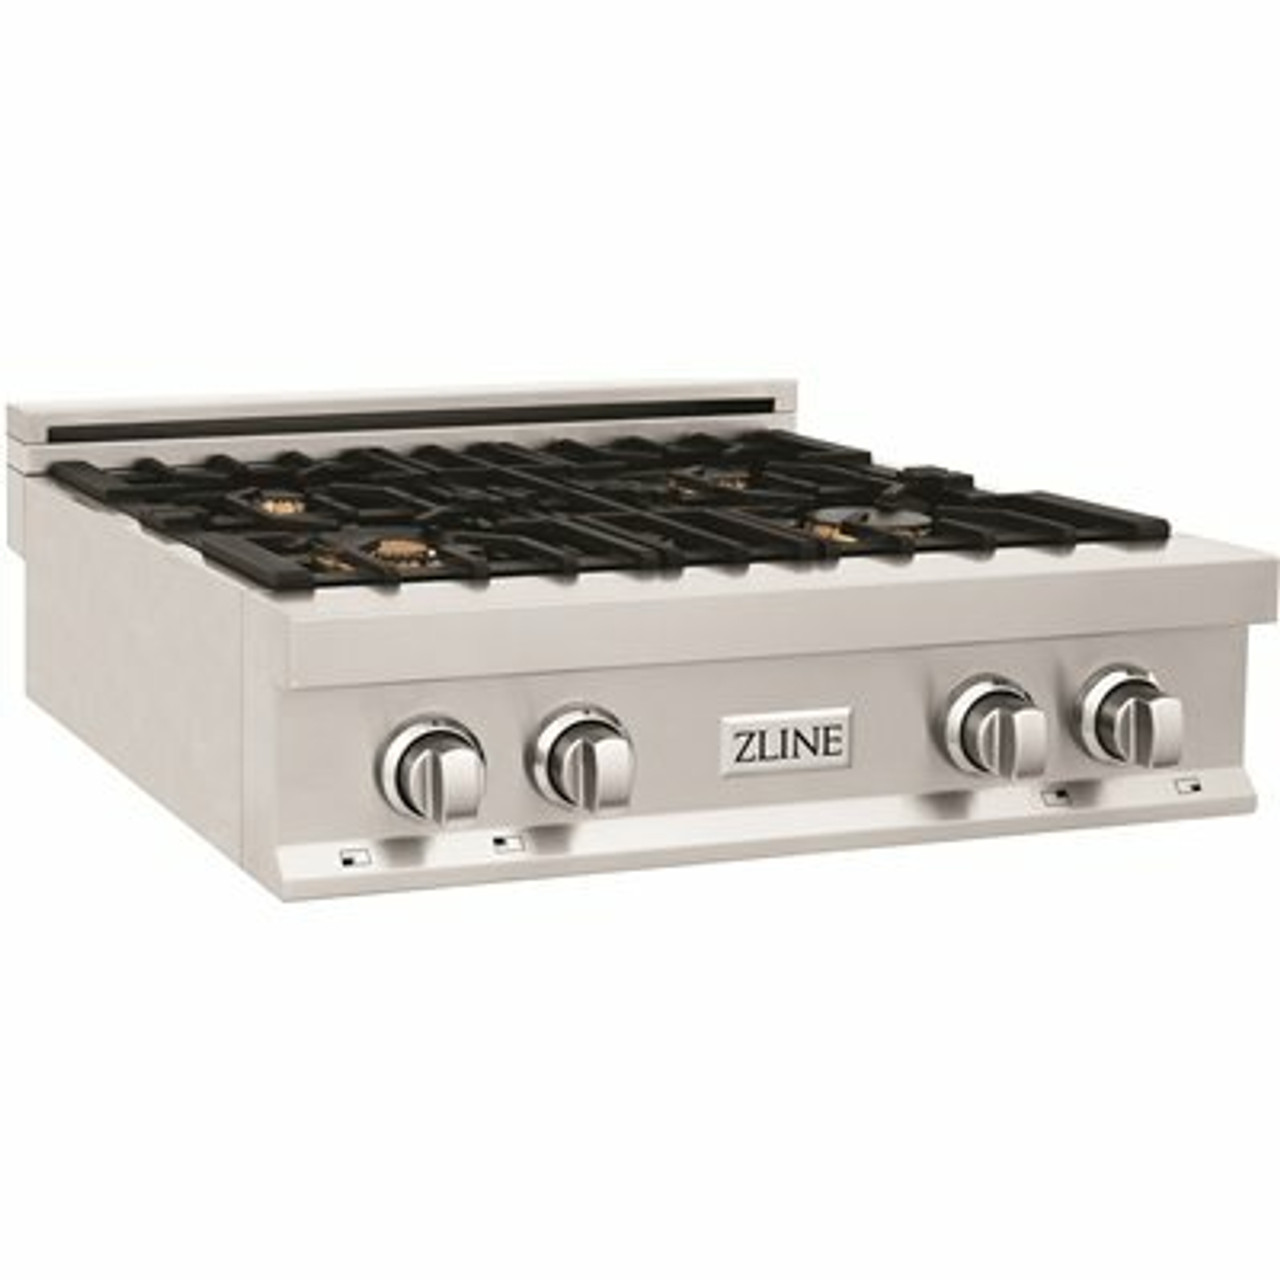 Zline Kitchen And Bath 30 In. Porcelain Gas Stovetop In Stainless Steel With 4 Brass Burners